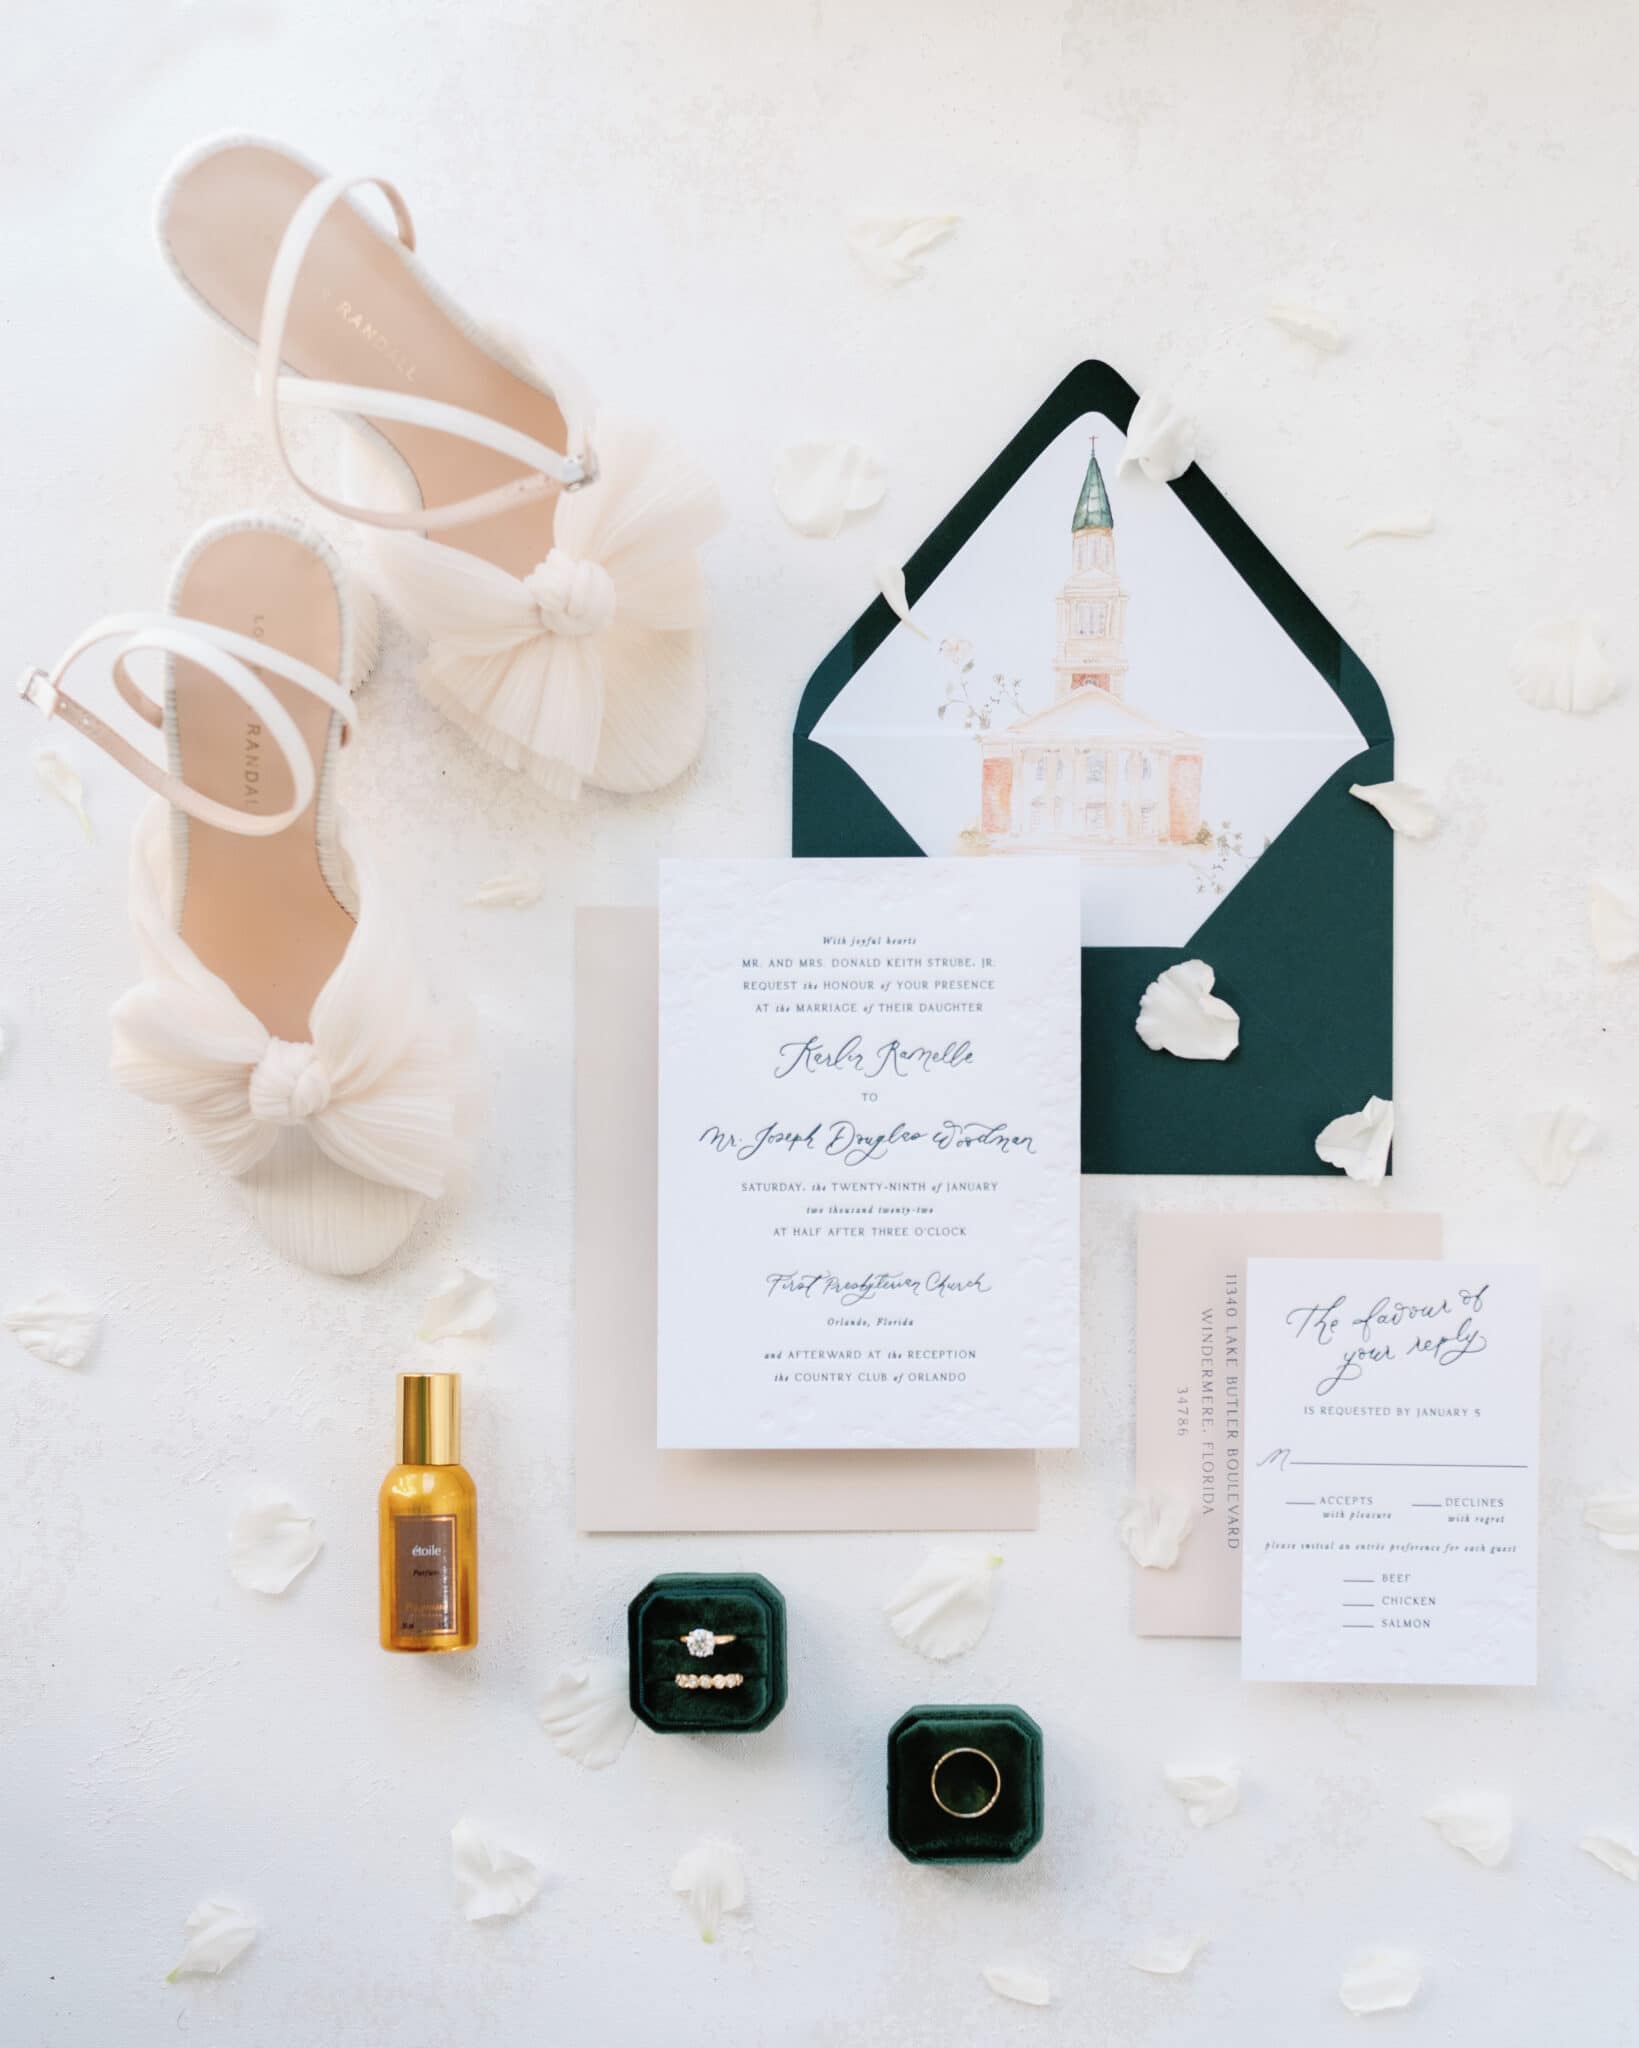 bride's shoes, perfume, wedding rings and invitations are items brides need to remember on her special day